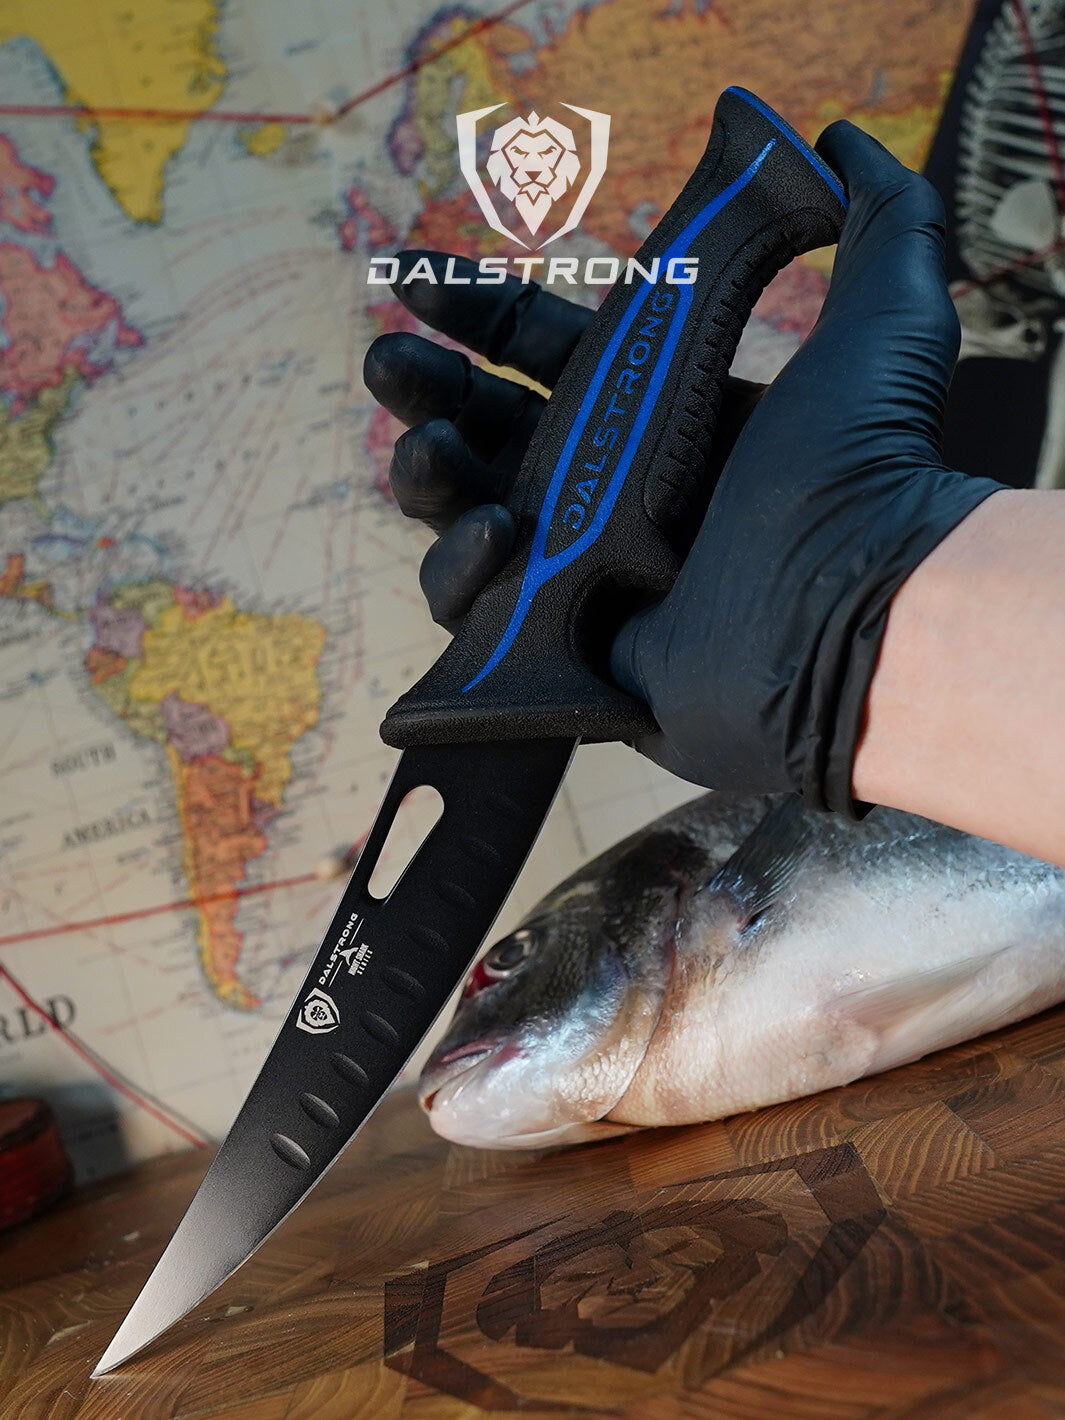 Dalstrong night shark series 6 inch curved boning knife with water proof handle on a cutting board with fish.